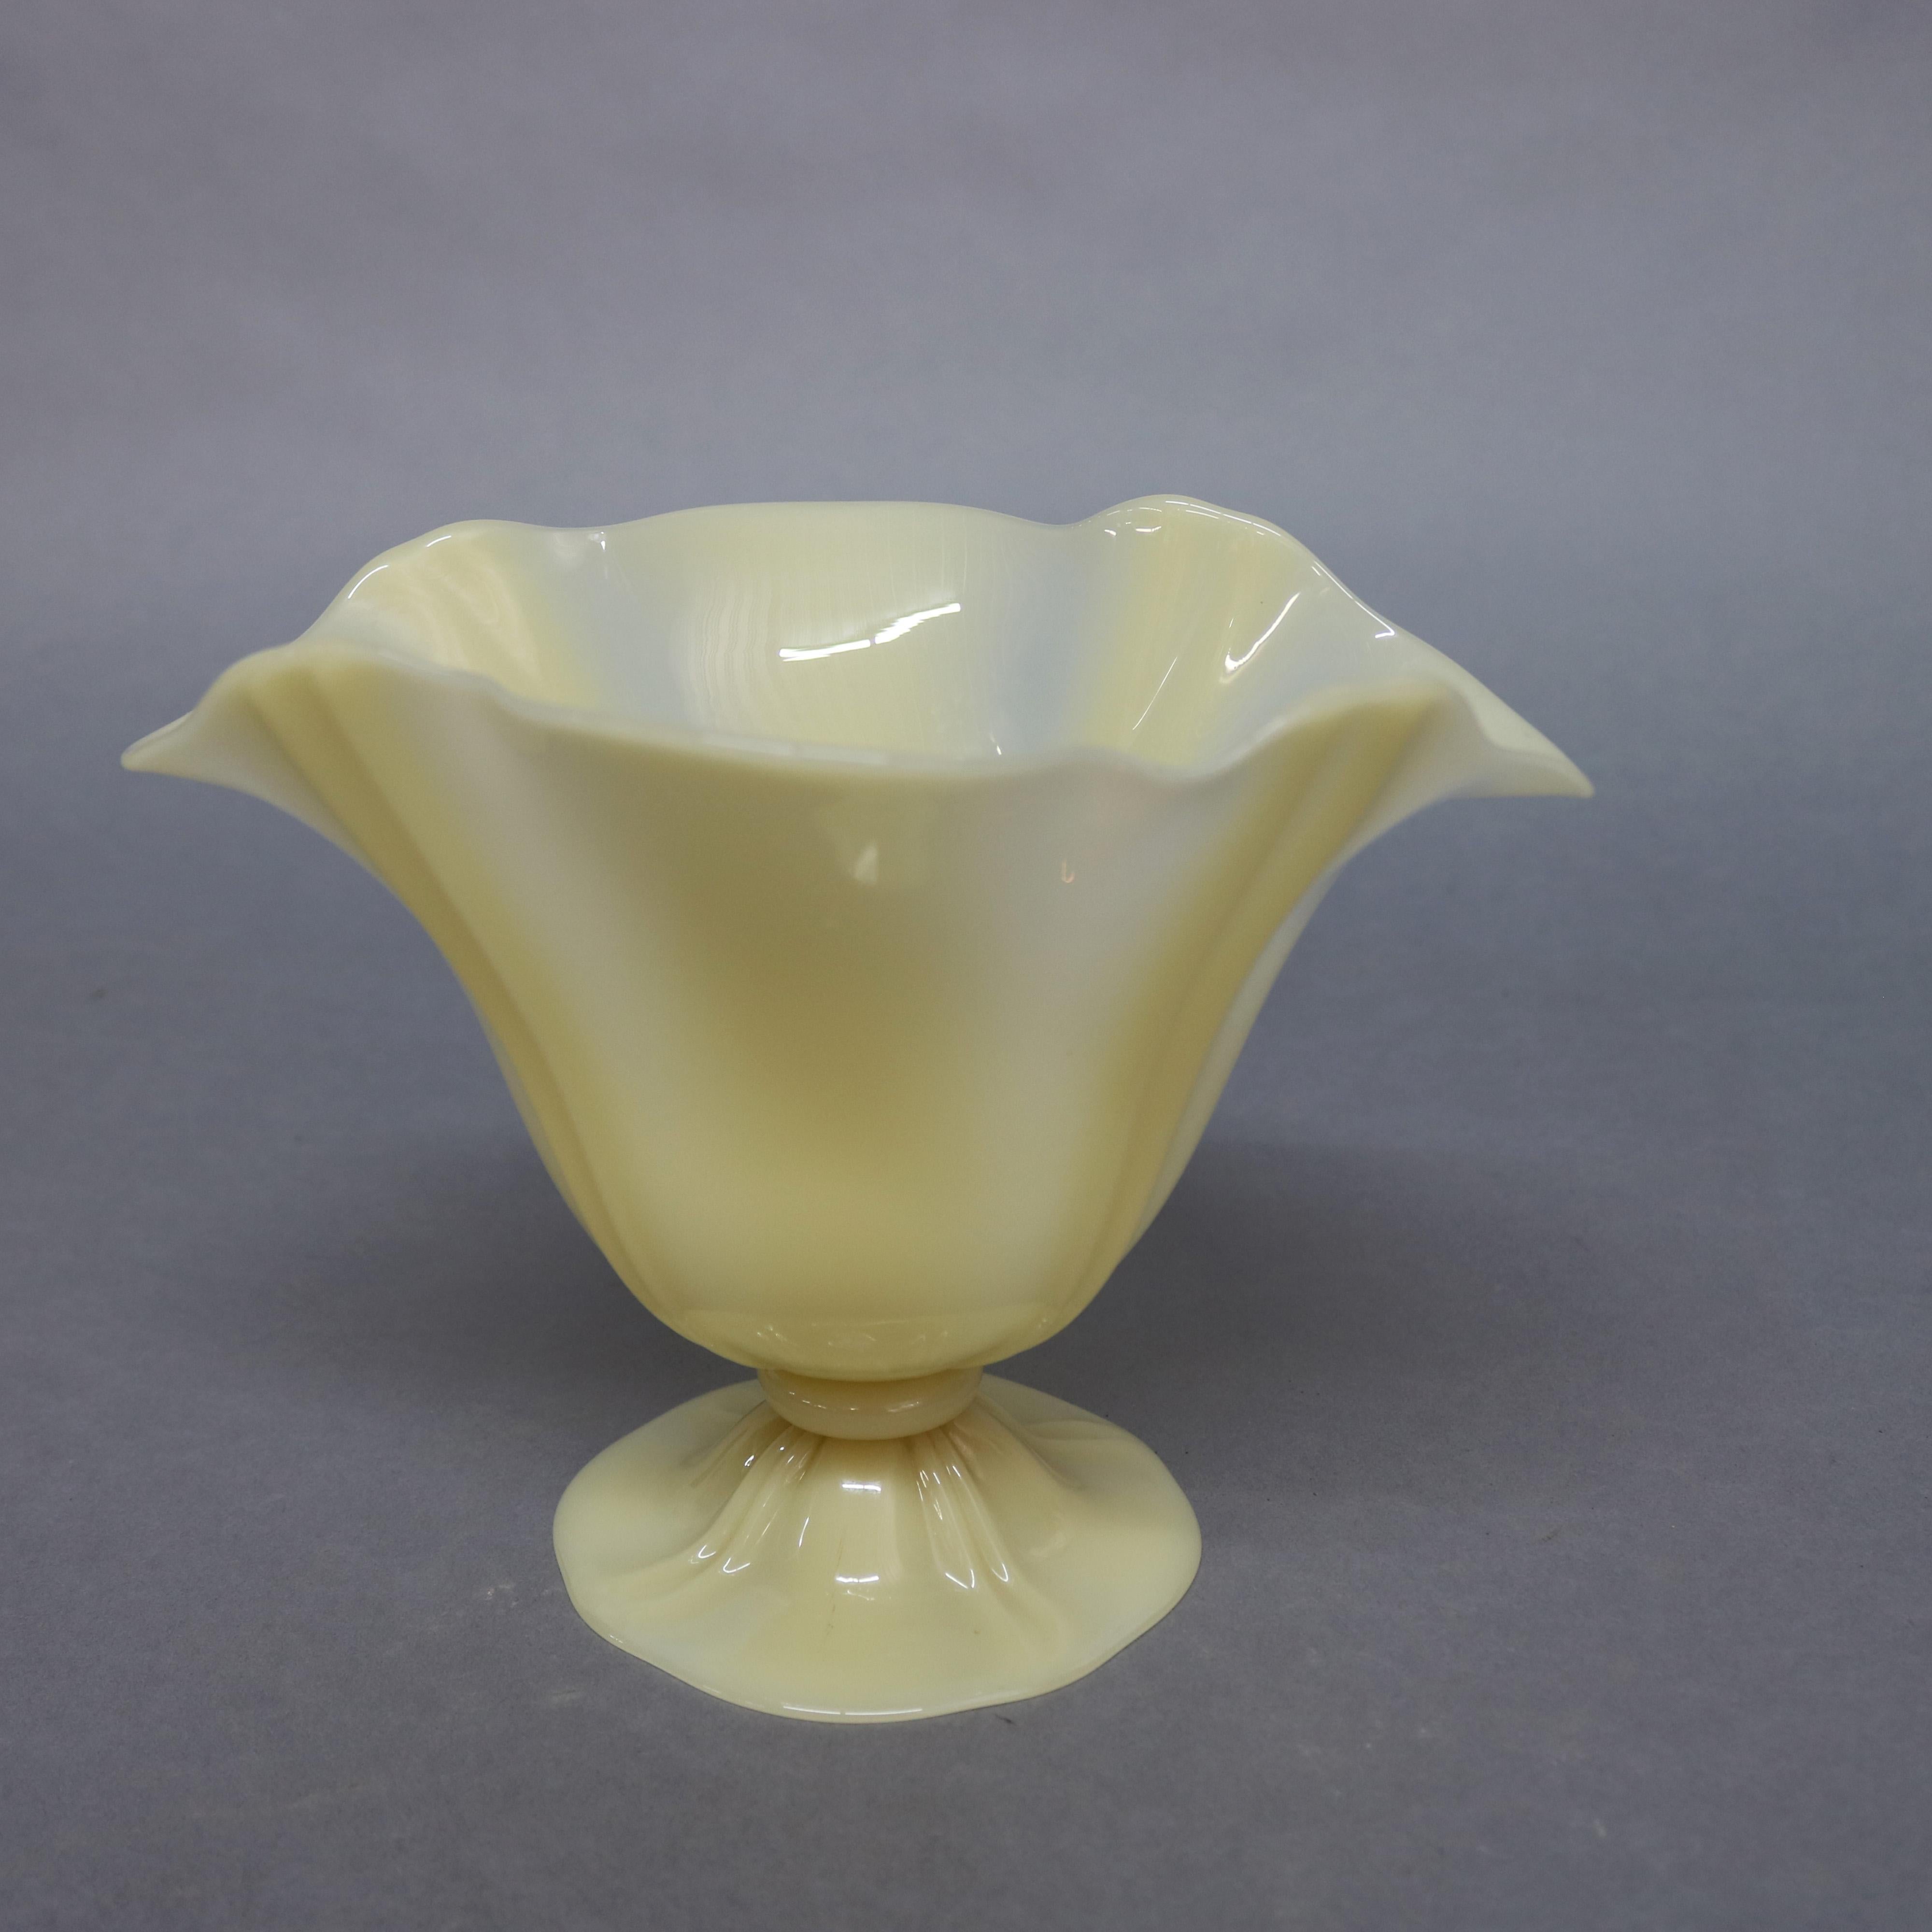 Steuben vase features ivorene art glass with ruffled bowl surmounting footed base, c1930

***DELIVERY NOTICE – Due to COVID-19 we are employing NO-CONTACT PRACTICES in the transfer of purchased items.  Additionally, for those who prefer to delay